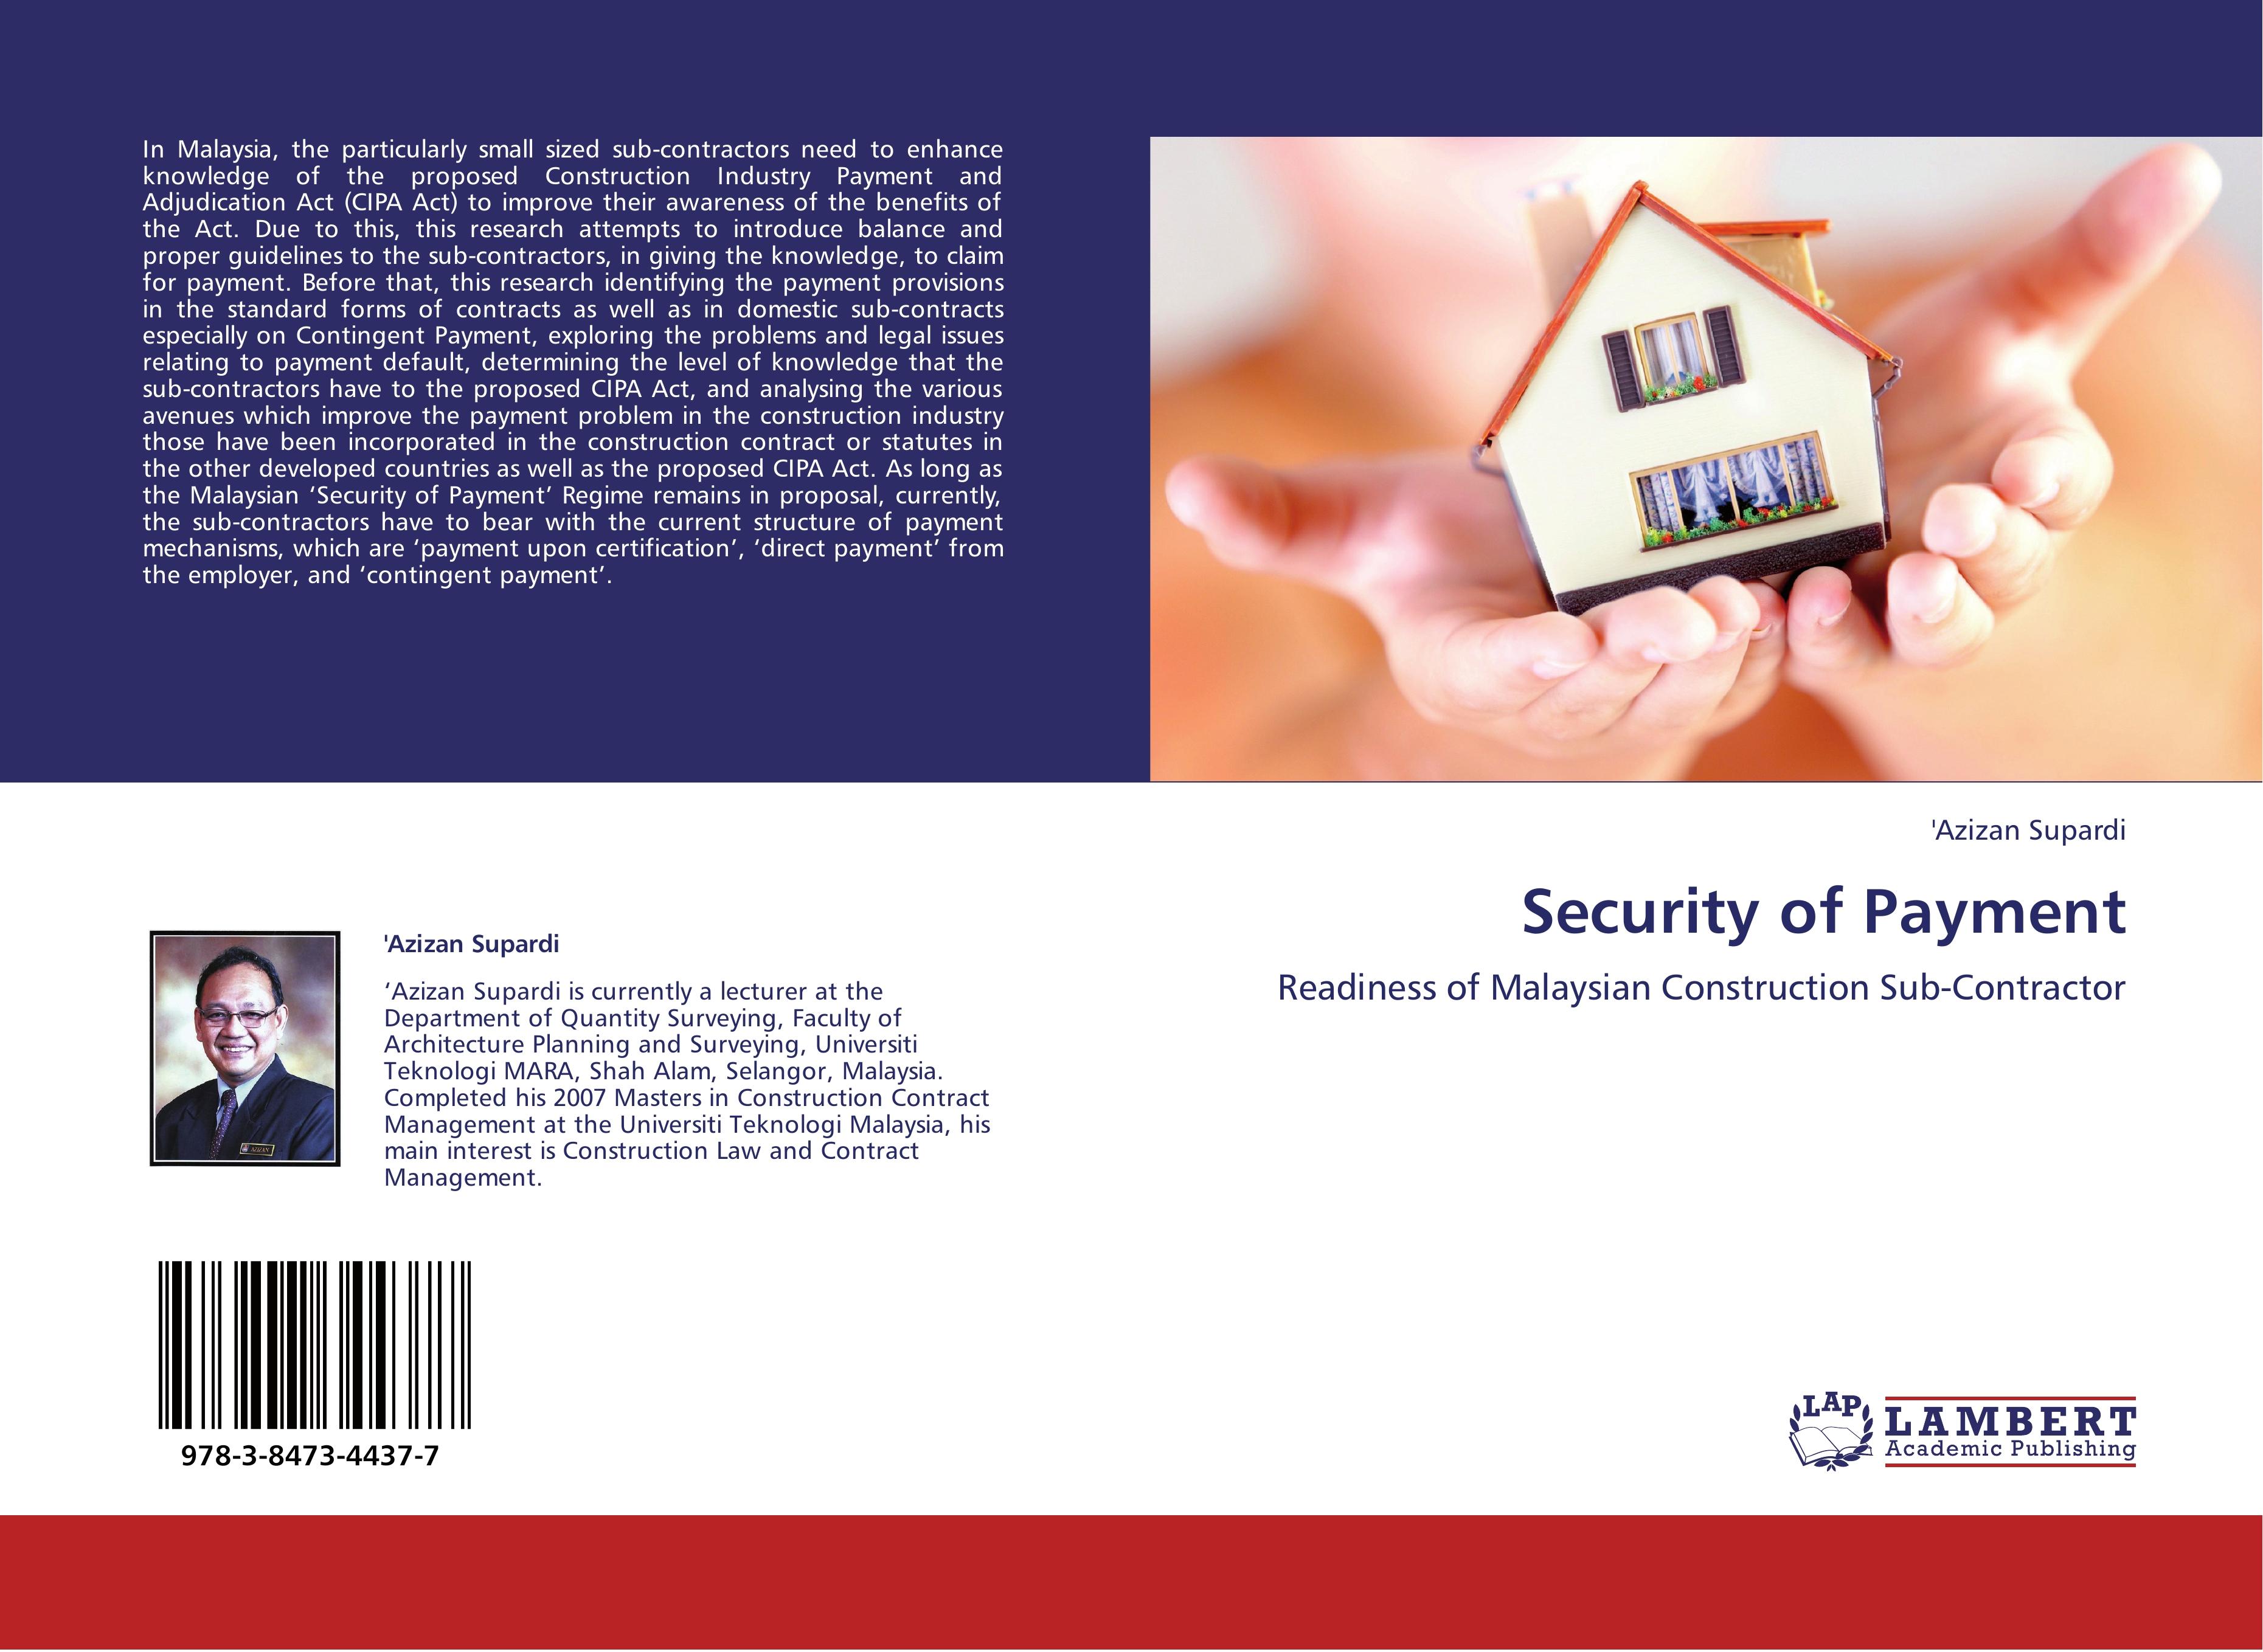 Security of Payment | Readiness of Malaysian Construction Sub-Contractor | 'Azizan Supardi | Taschenbuch | Paperback | 84 S. | Englisch | 2012 | LAP LAMBERT Academic Publishing | EAN 9783847344377 - Supardi, 'Azizan